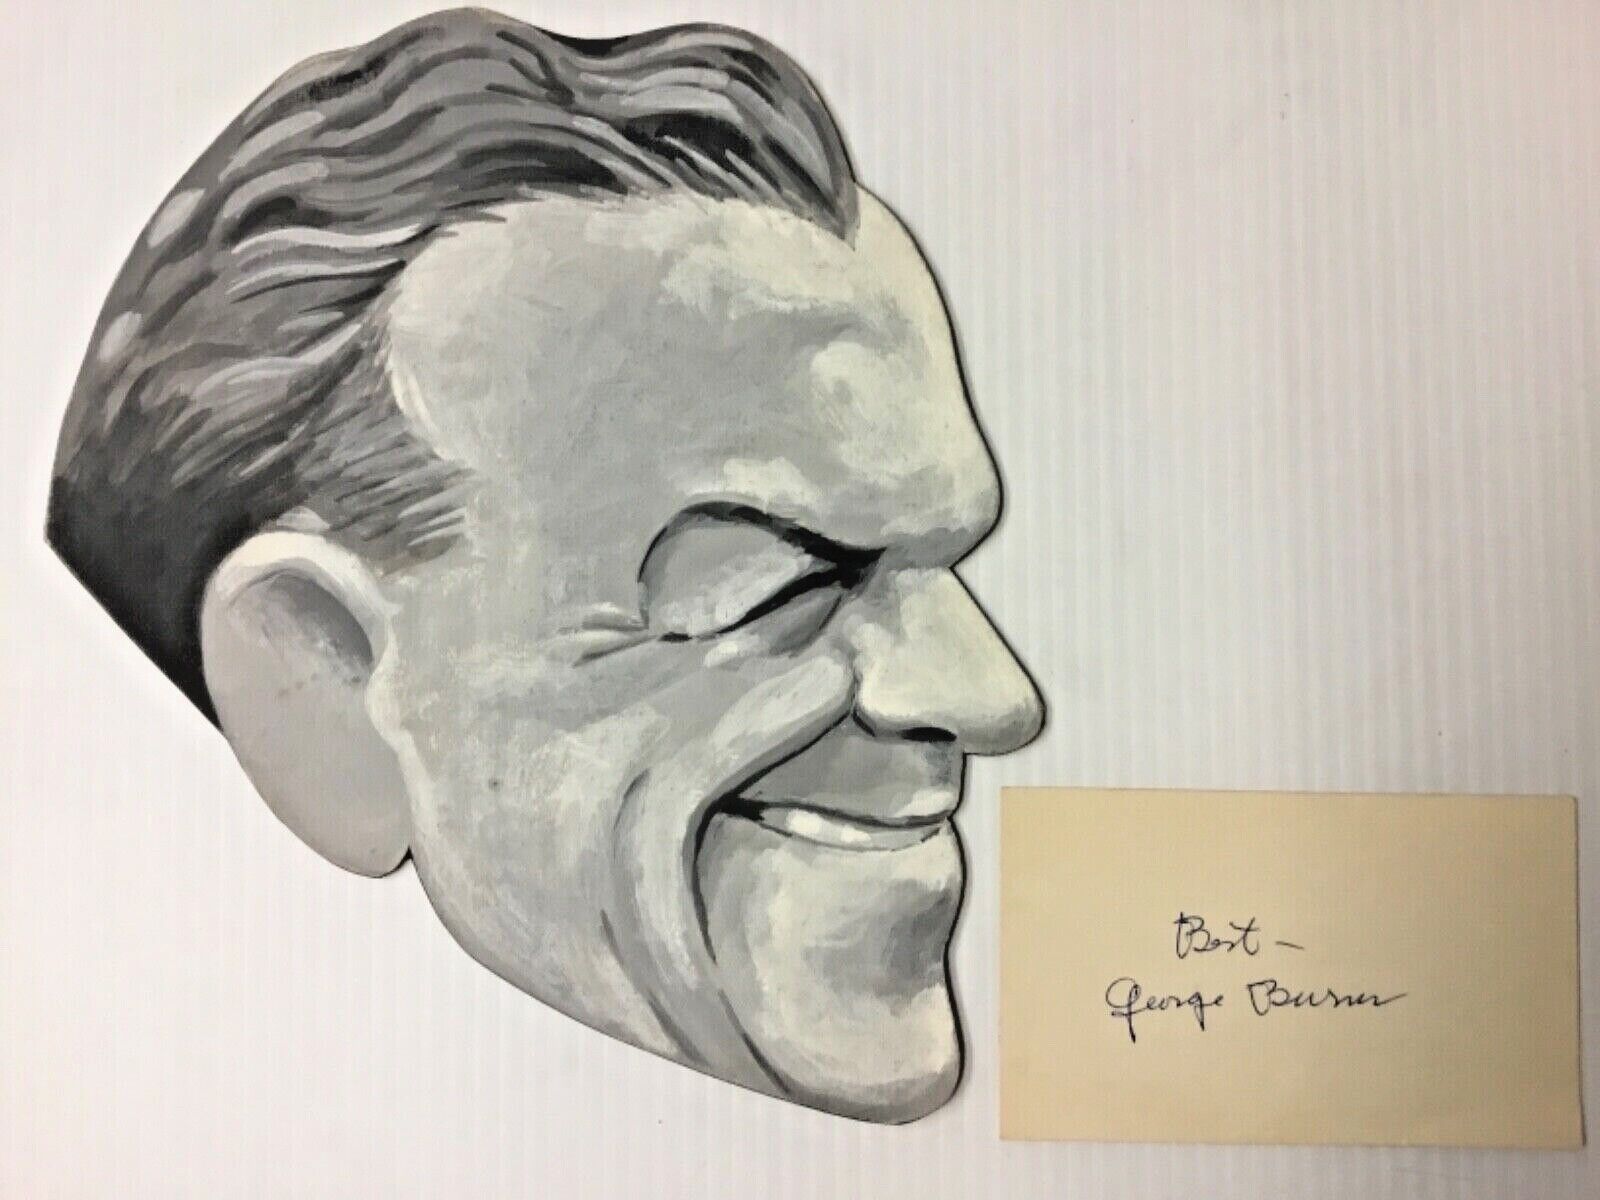  GEORGE BURNS HAND PAINTED HEAD created by AL KILGORE and BURNS AUTOGRAPH AK485